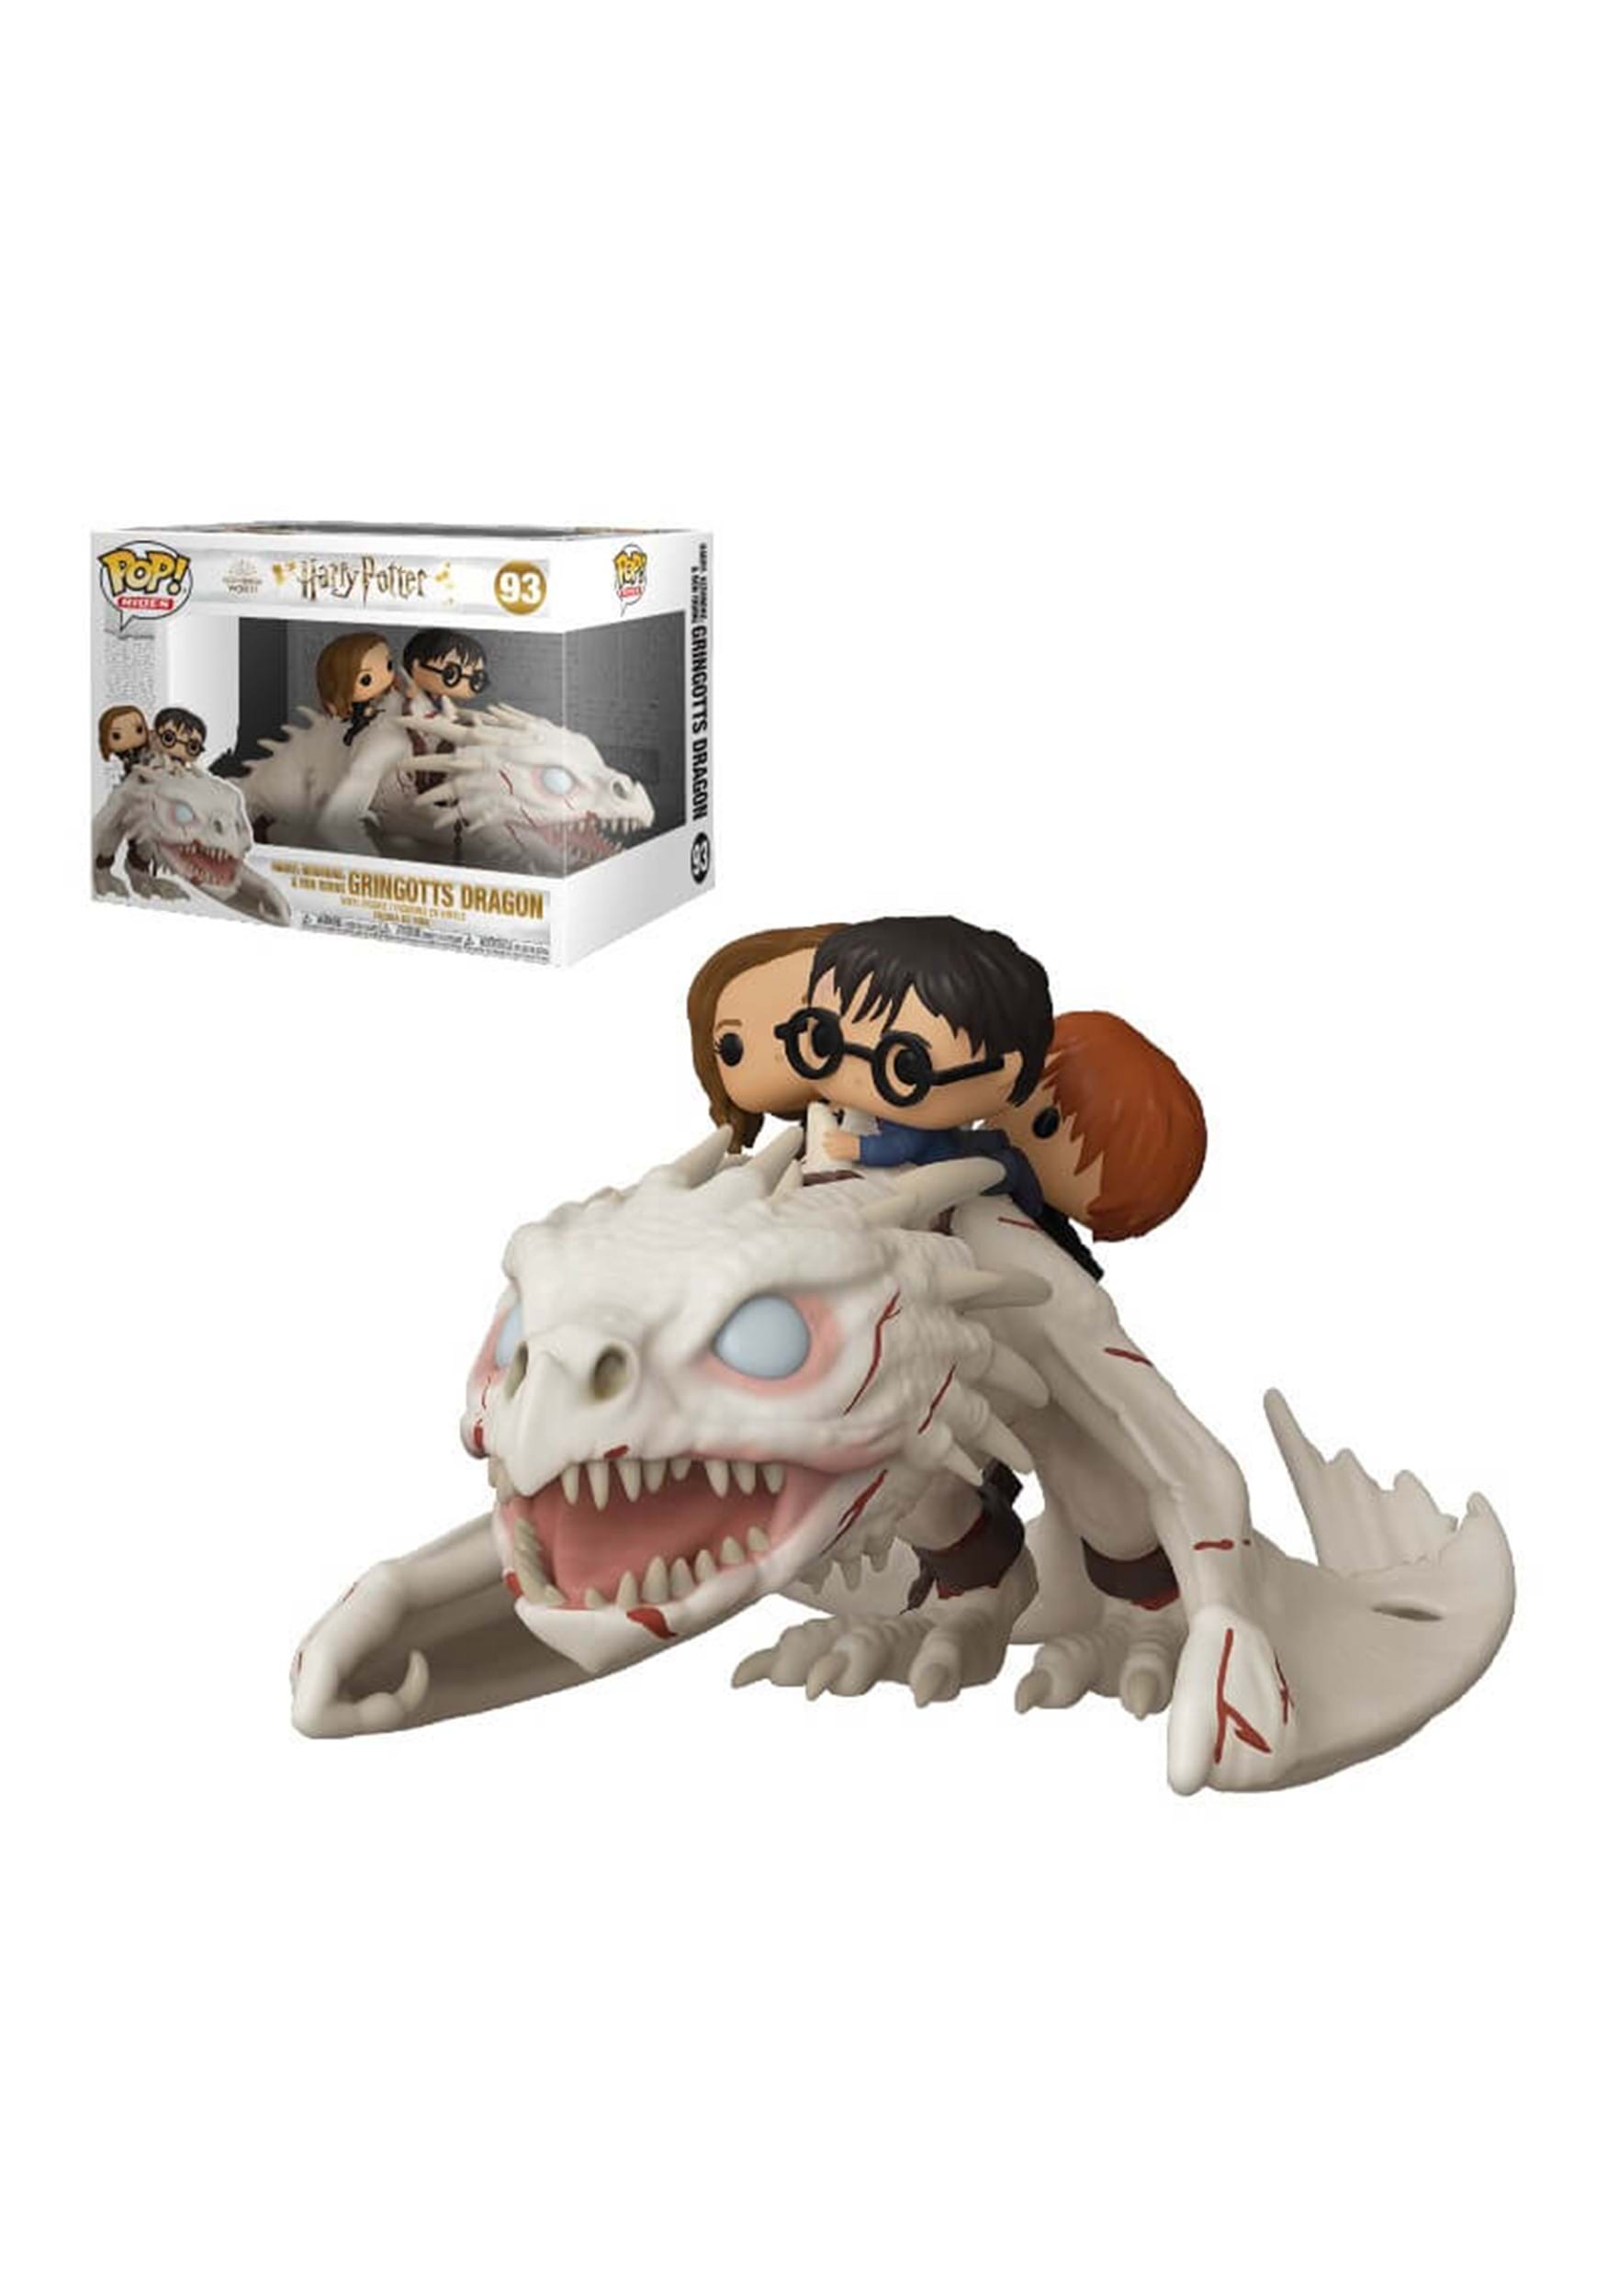 Funko POP! Ride: Harry Potter- Dragon with Harry, Ron, and Hermione Figure